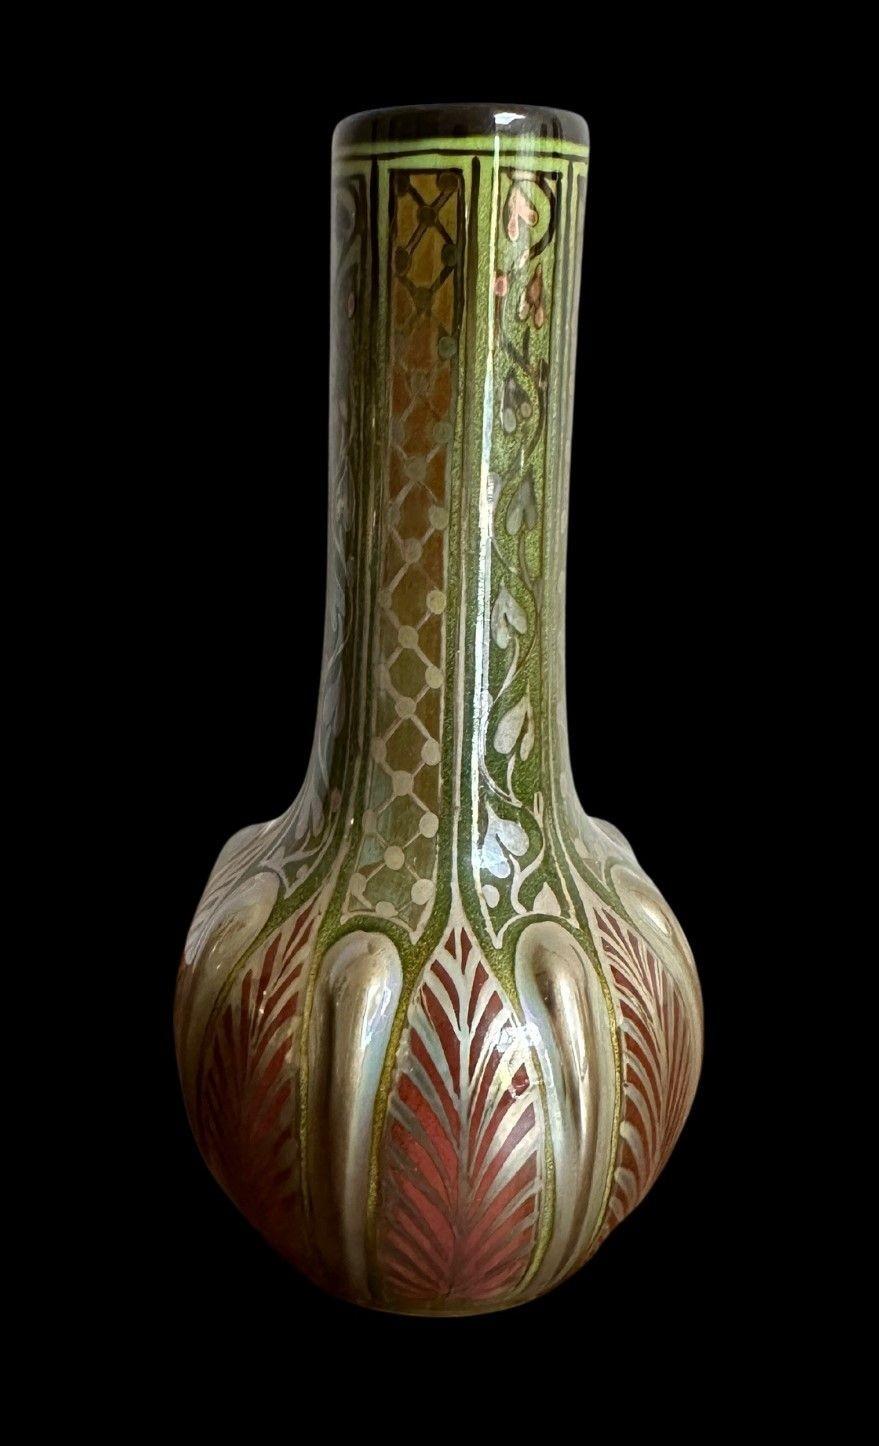 178
Pilkingtons Royal Lancastrian Lustre vase by William Mycock
Decorated with “Tear Drops” in high relief and bearing a design of stylised ferns and foliage. A strong even firing
Measuring 19cm high and 9cm wide
Date cypher for 1914.